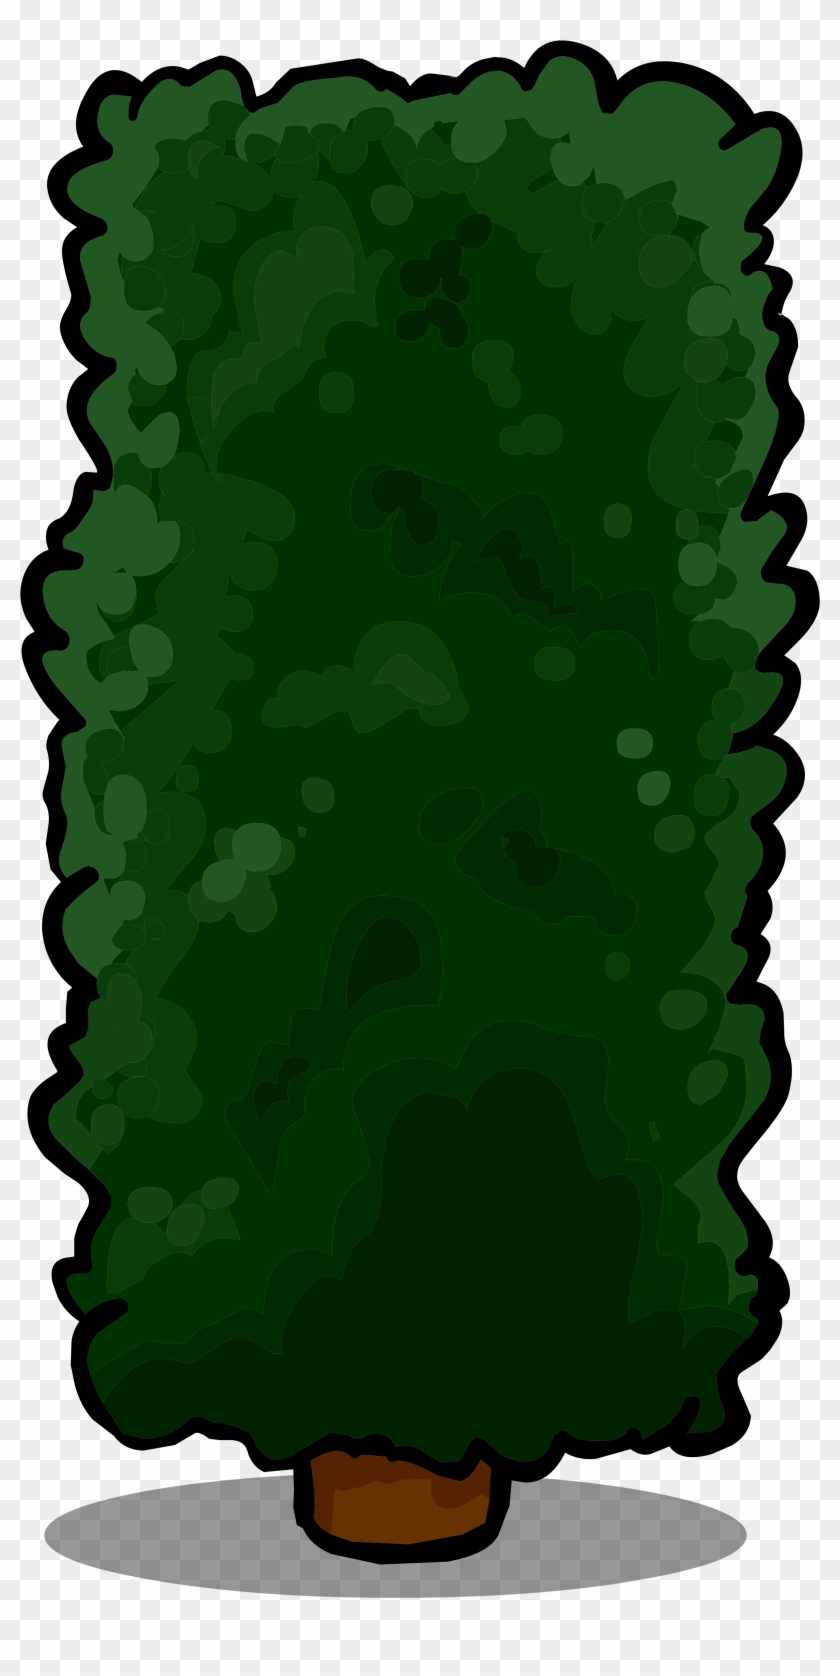 Hedge - Image - Hedge Clipart #1743335